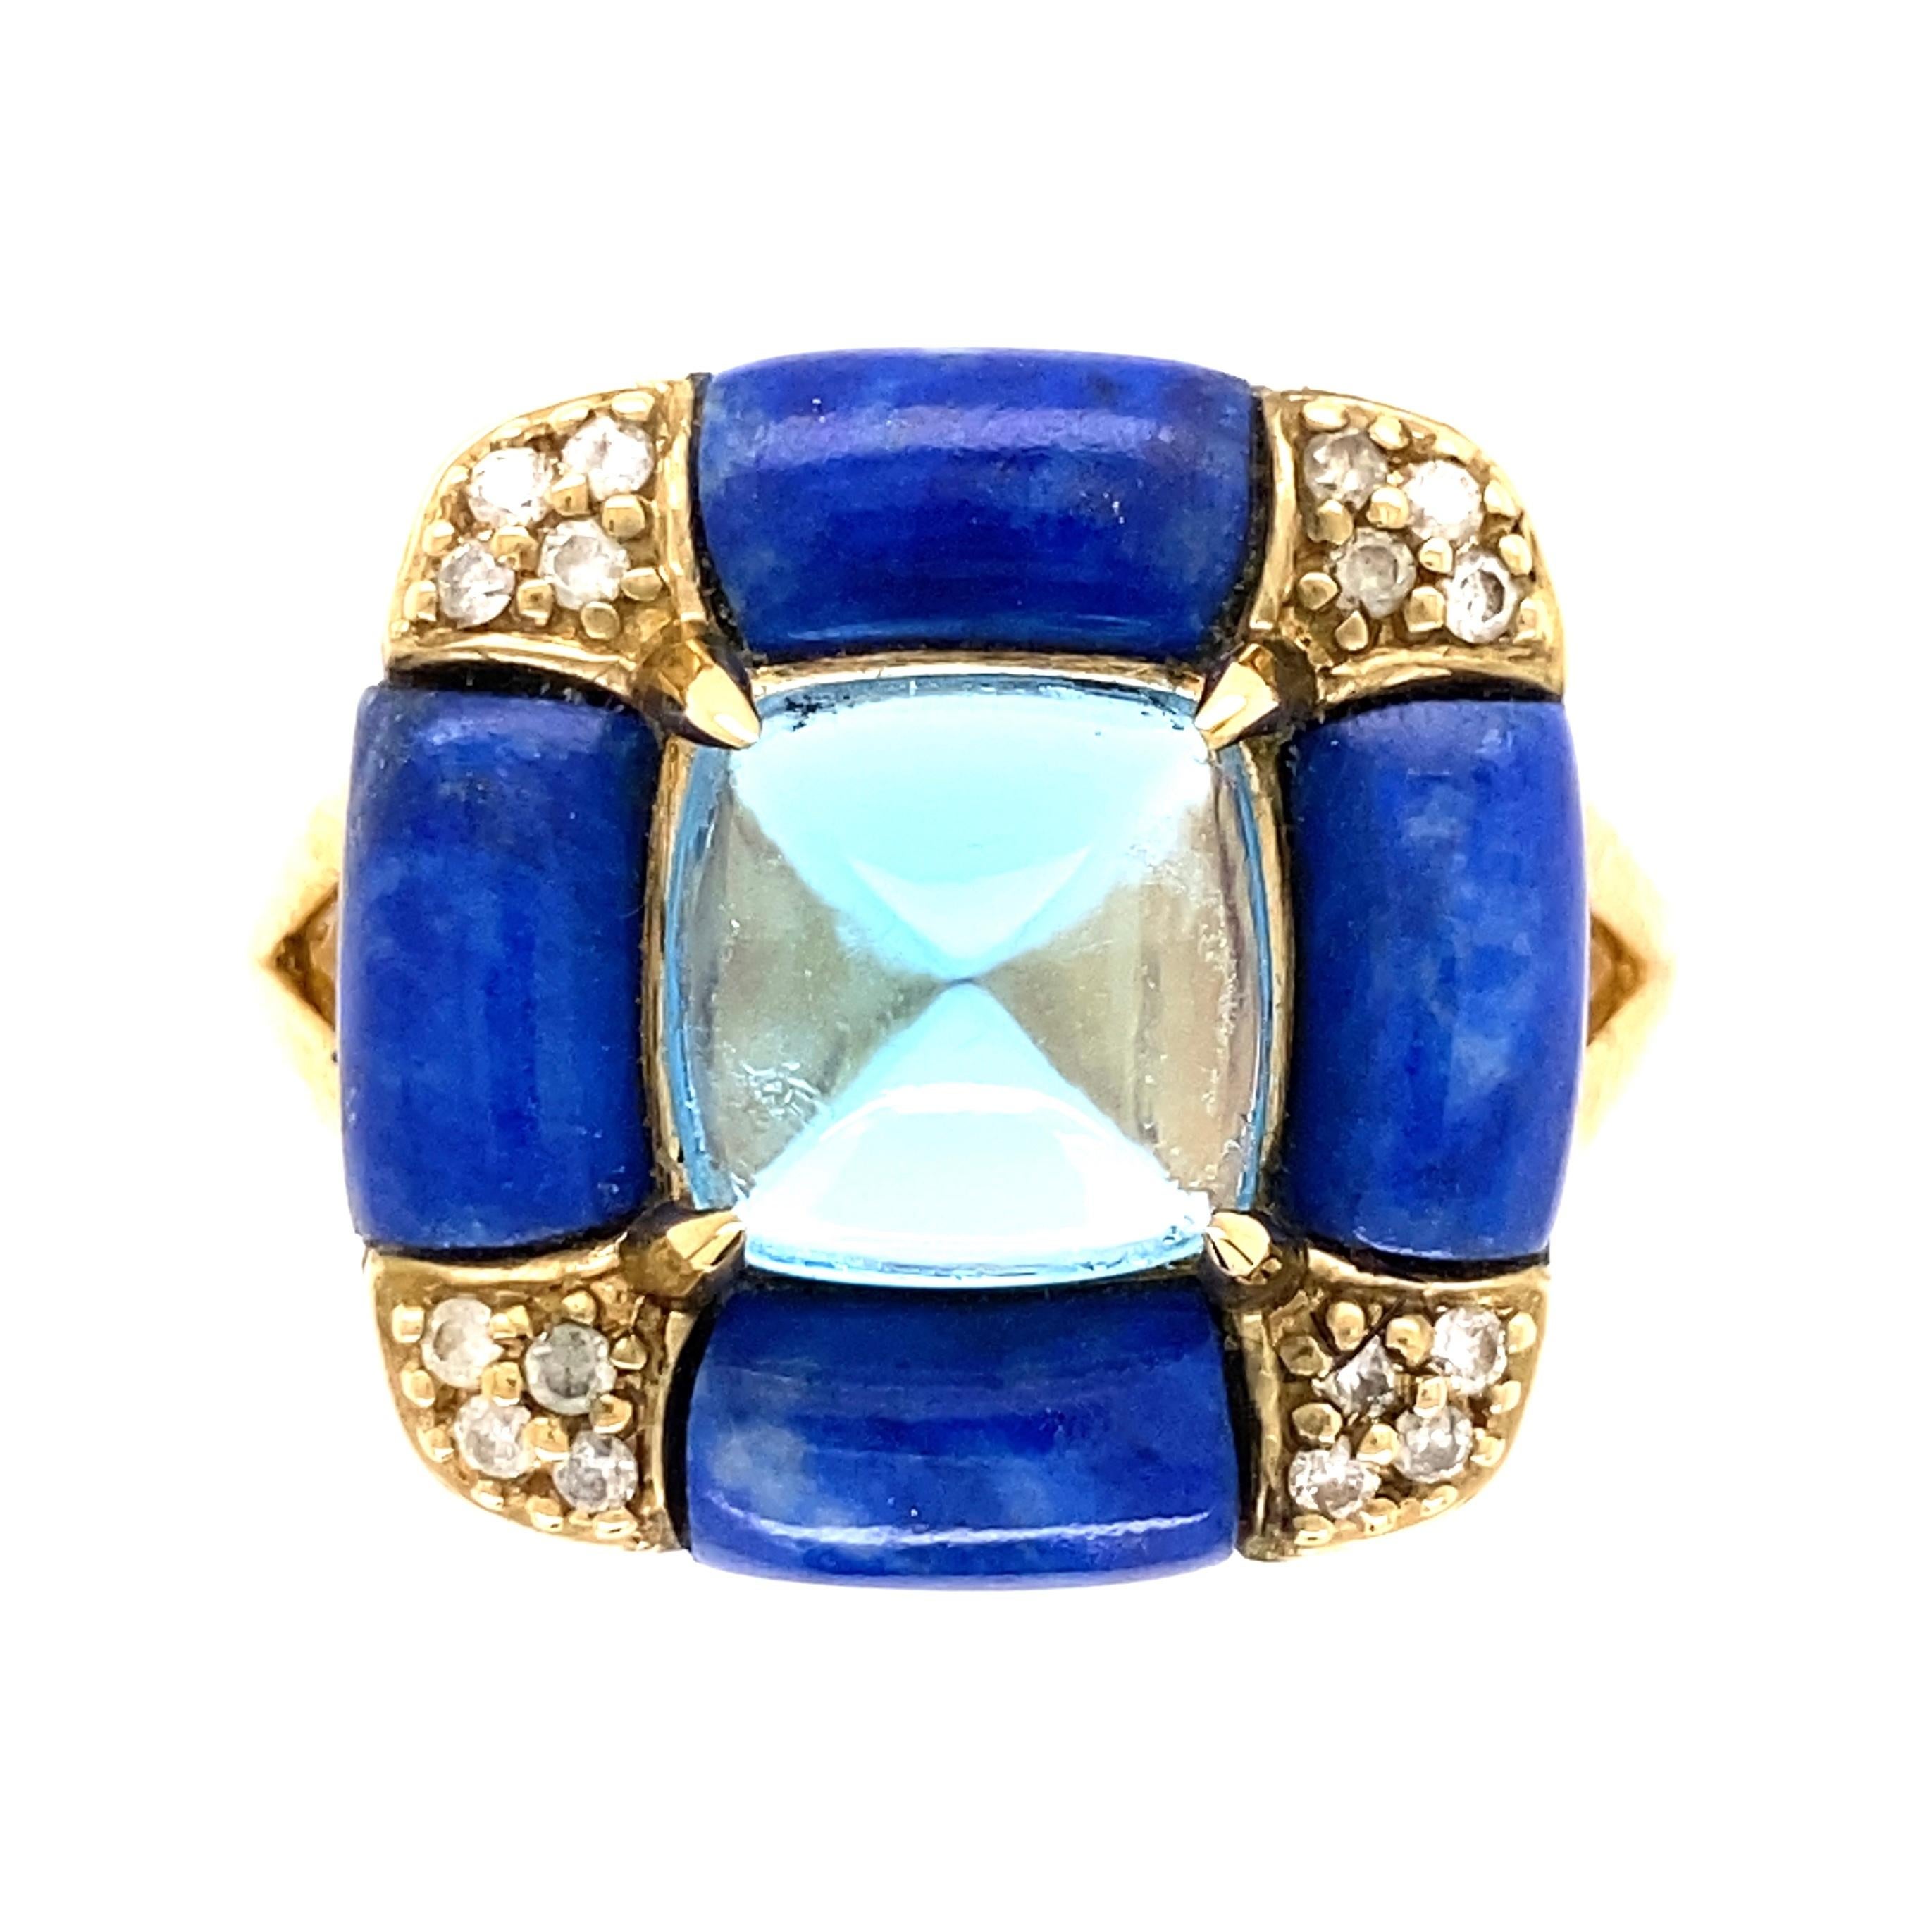 5.38 Carat Sugarloaf Blue Topaz Lapis and Diamond Ring Estate Fine Jewelry For Sale